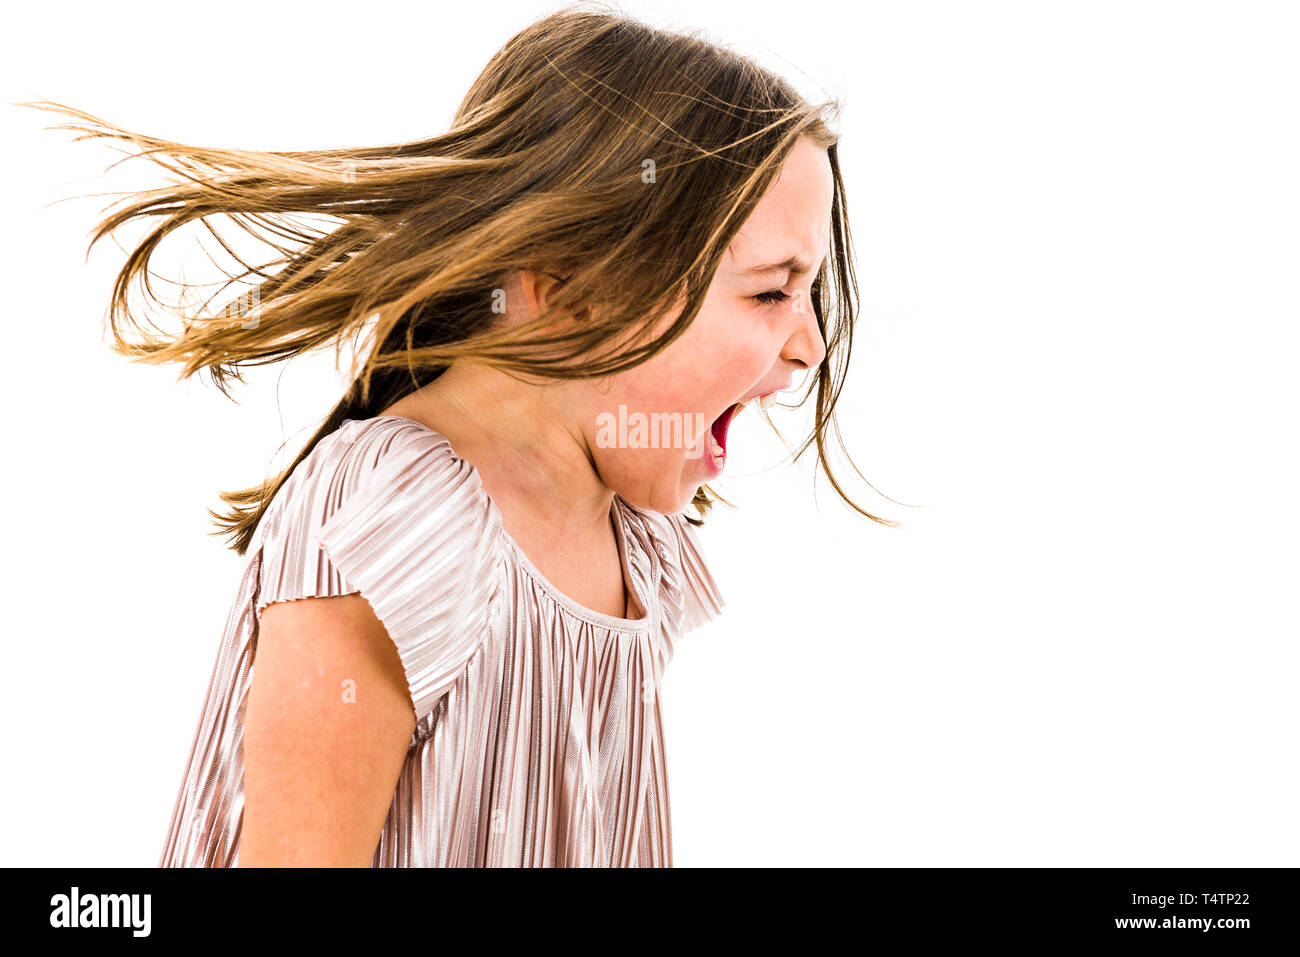 Little girl child yelling, shouting and screaming with bad manners. Angry upset girl is arguing with emotional expression on face. Frontal profile vie Stock Photo